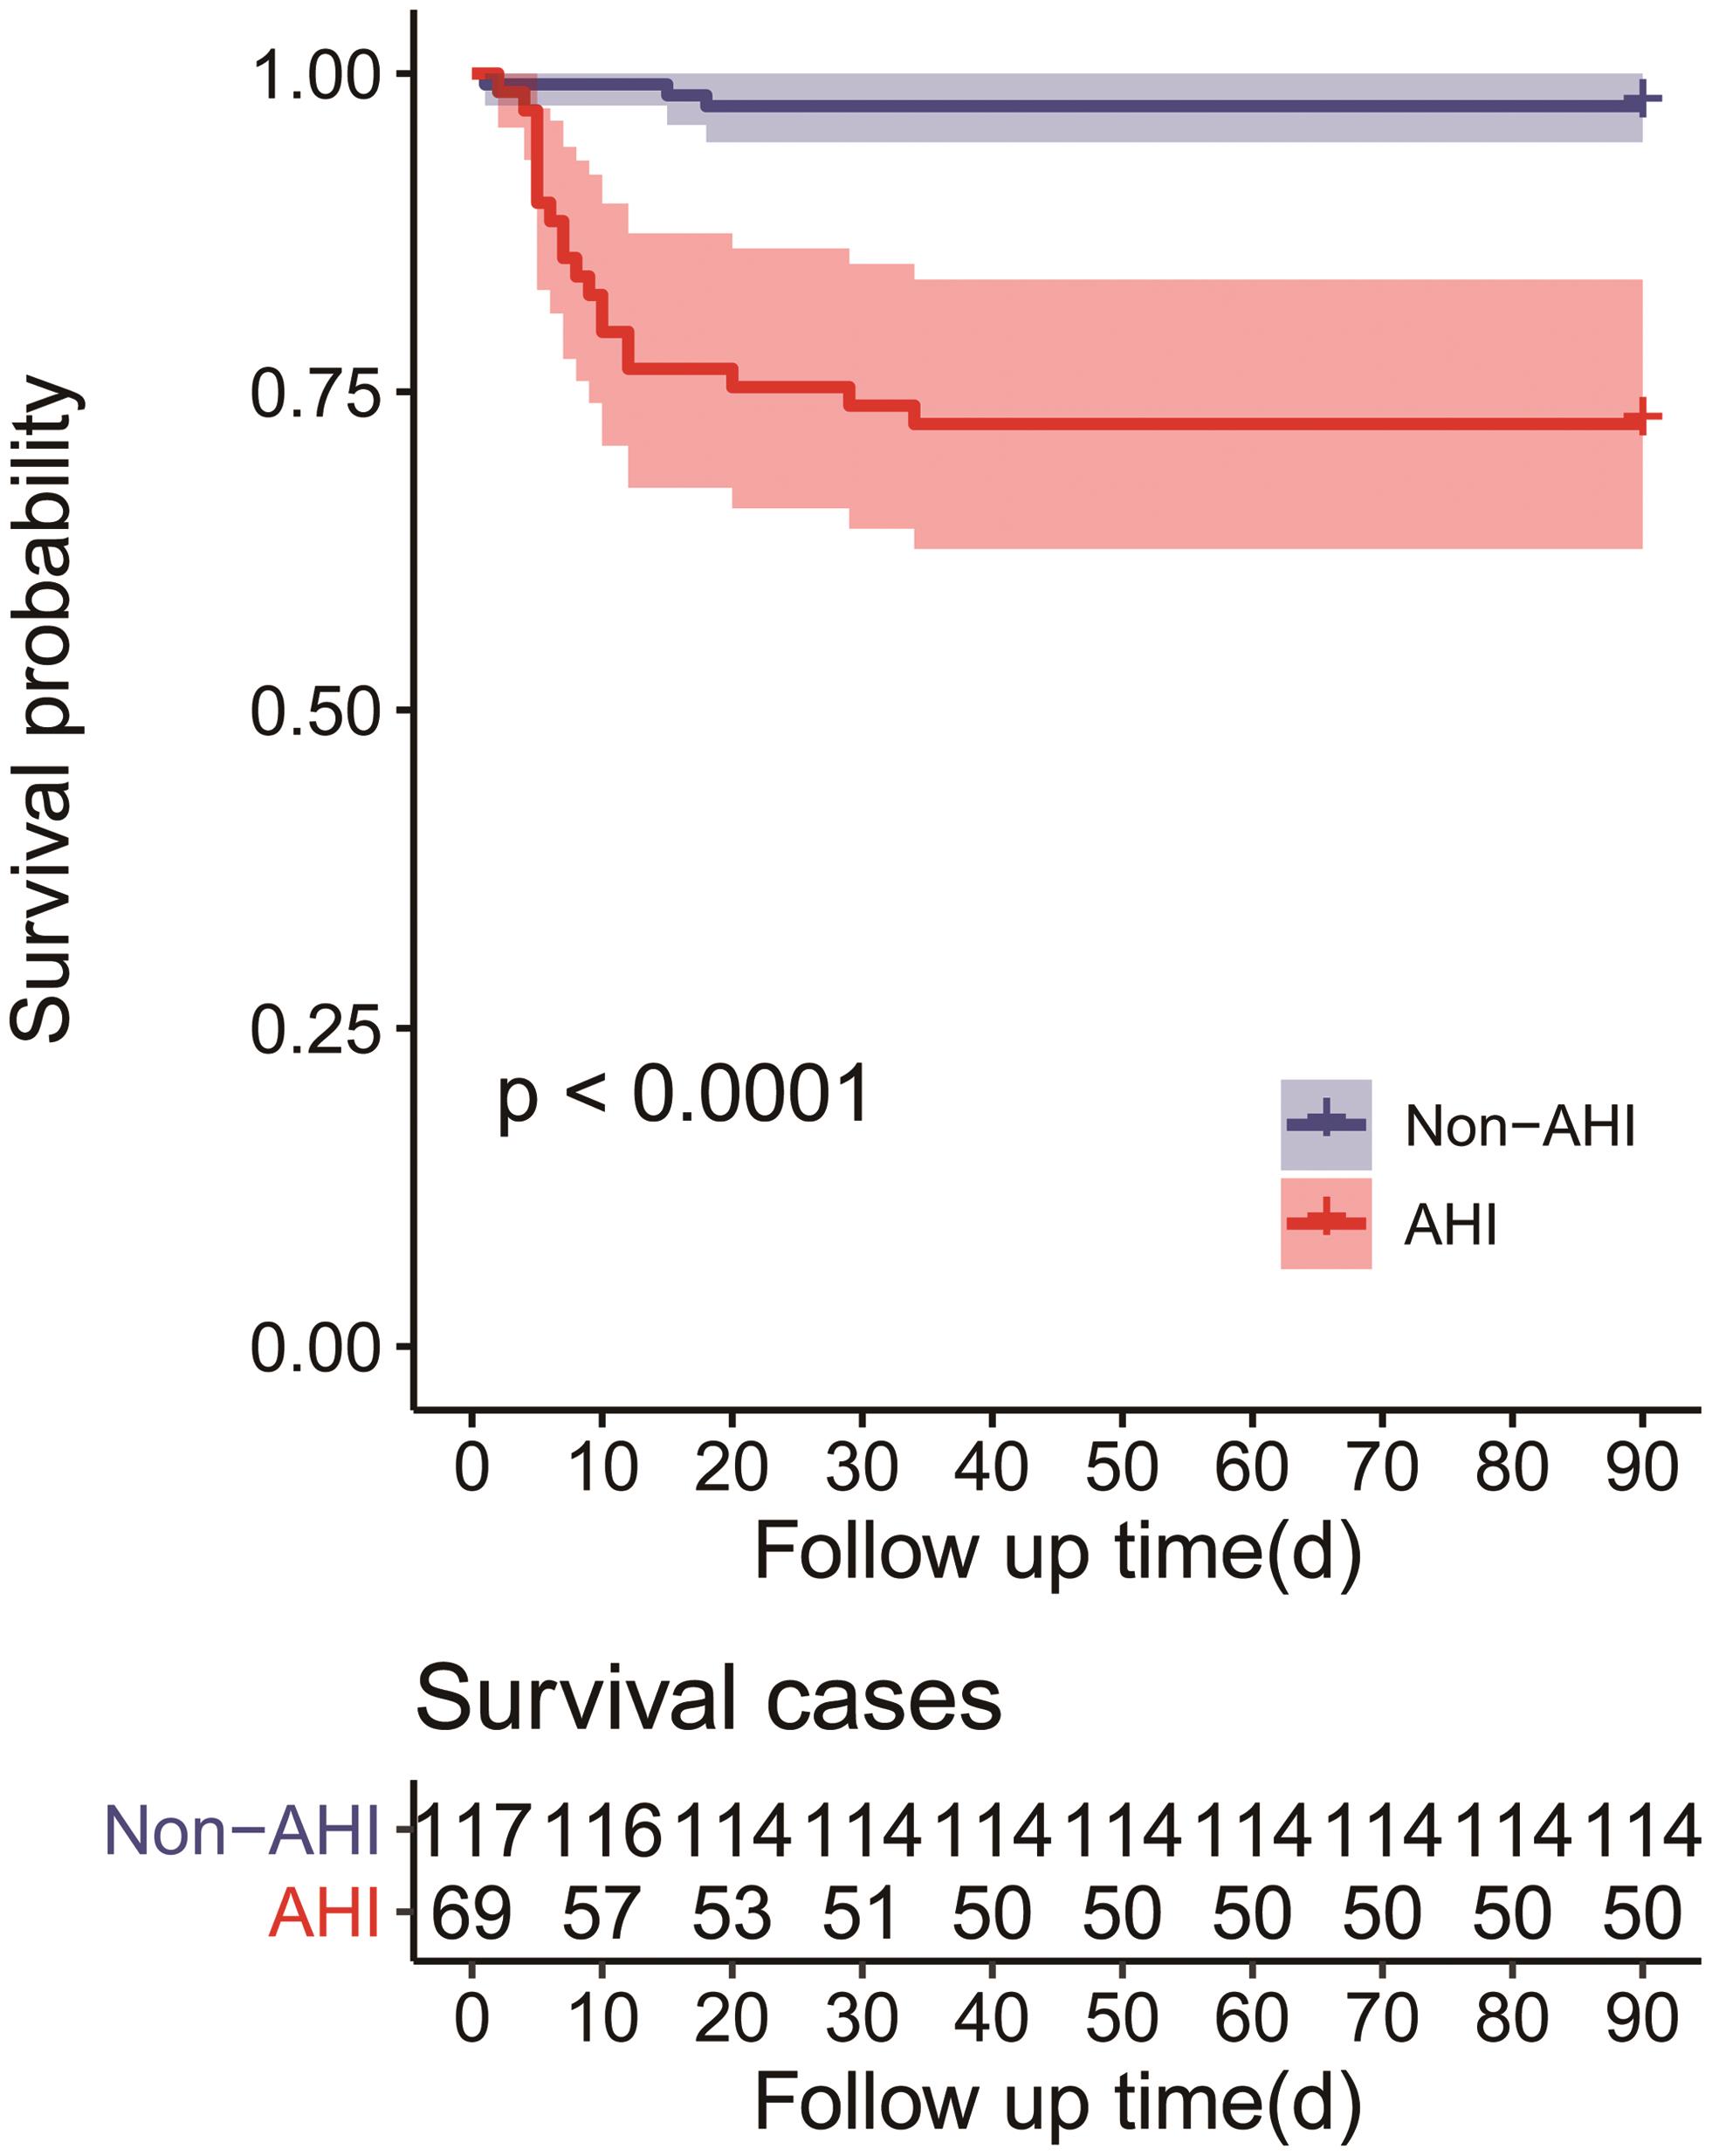 Survival curves of 90-day mortality rate in the AHI group and non-AHI group.